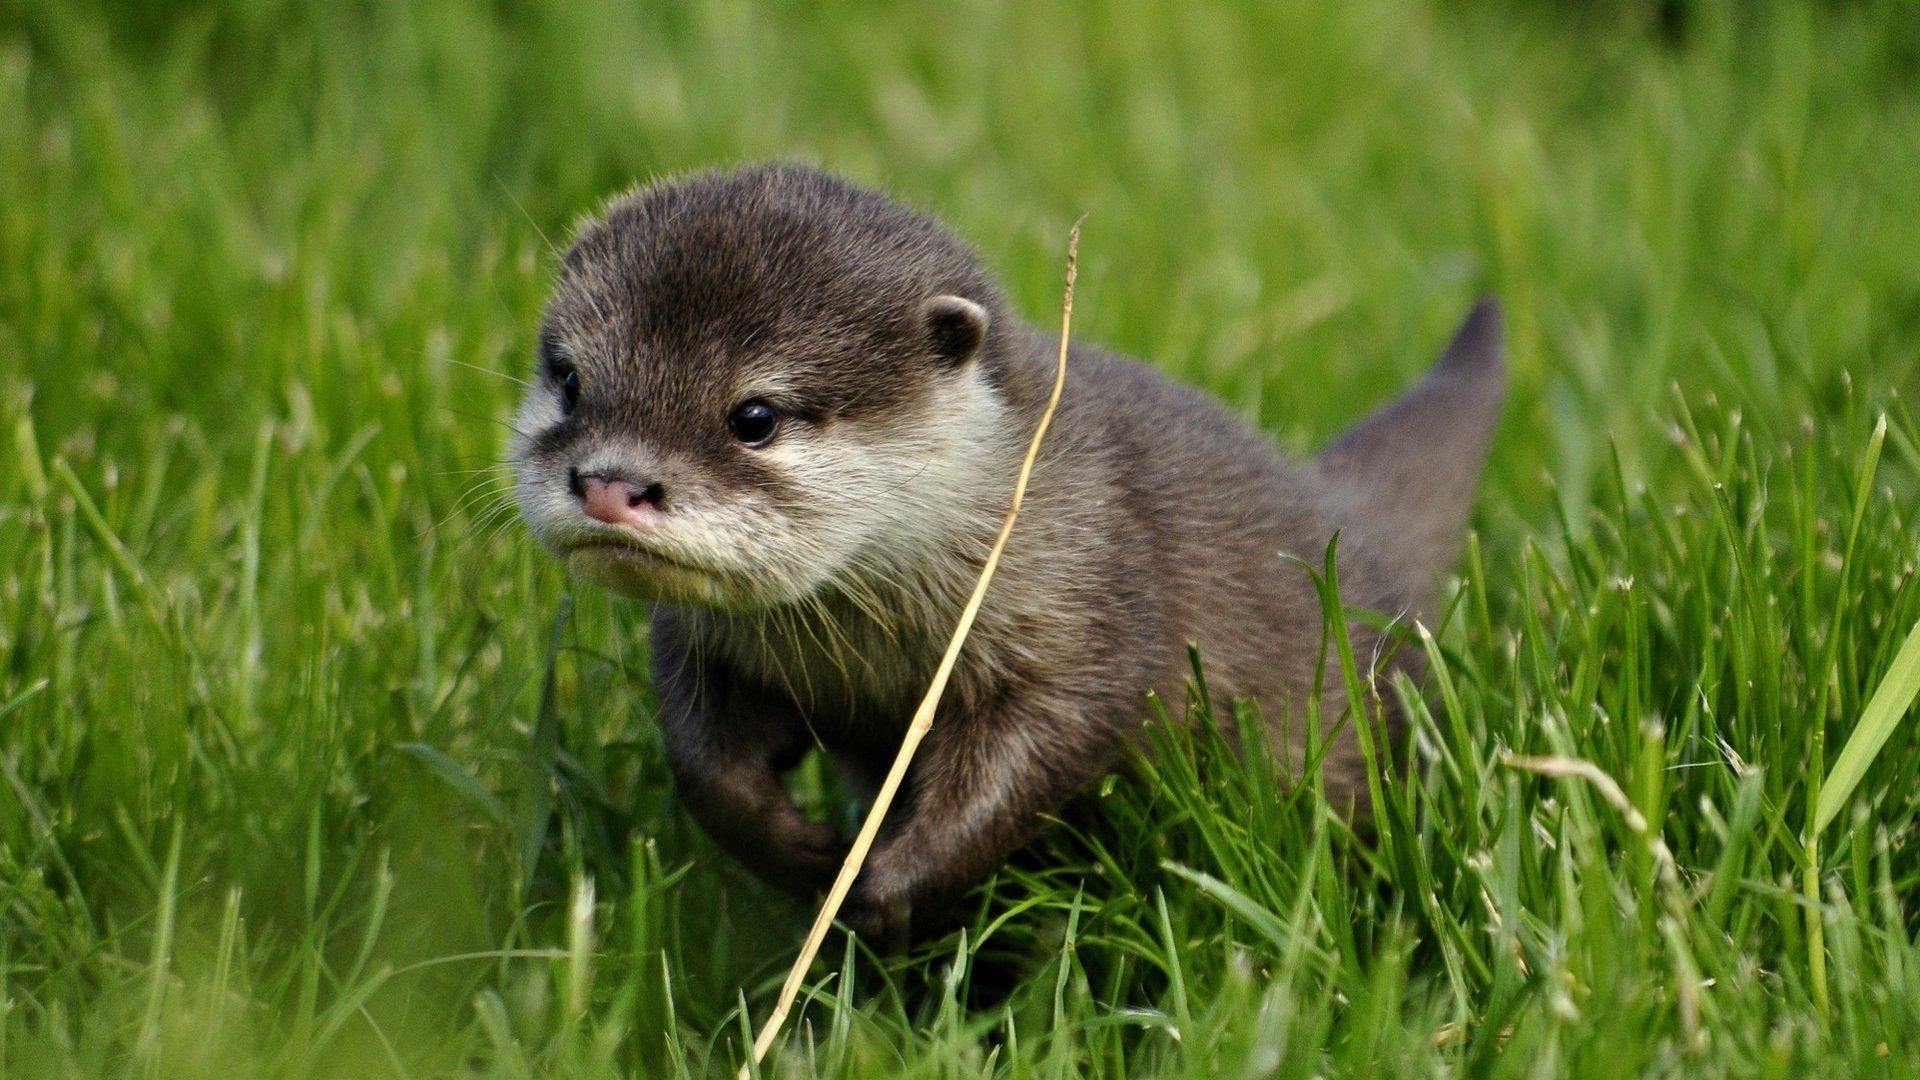 Asian Short Clawed Otter Wallpaper Background Image. View, download, comment, and rate. Otters cute, Baby animals, Baby otters